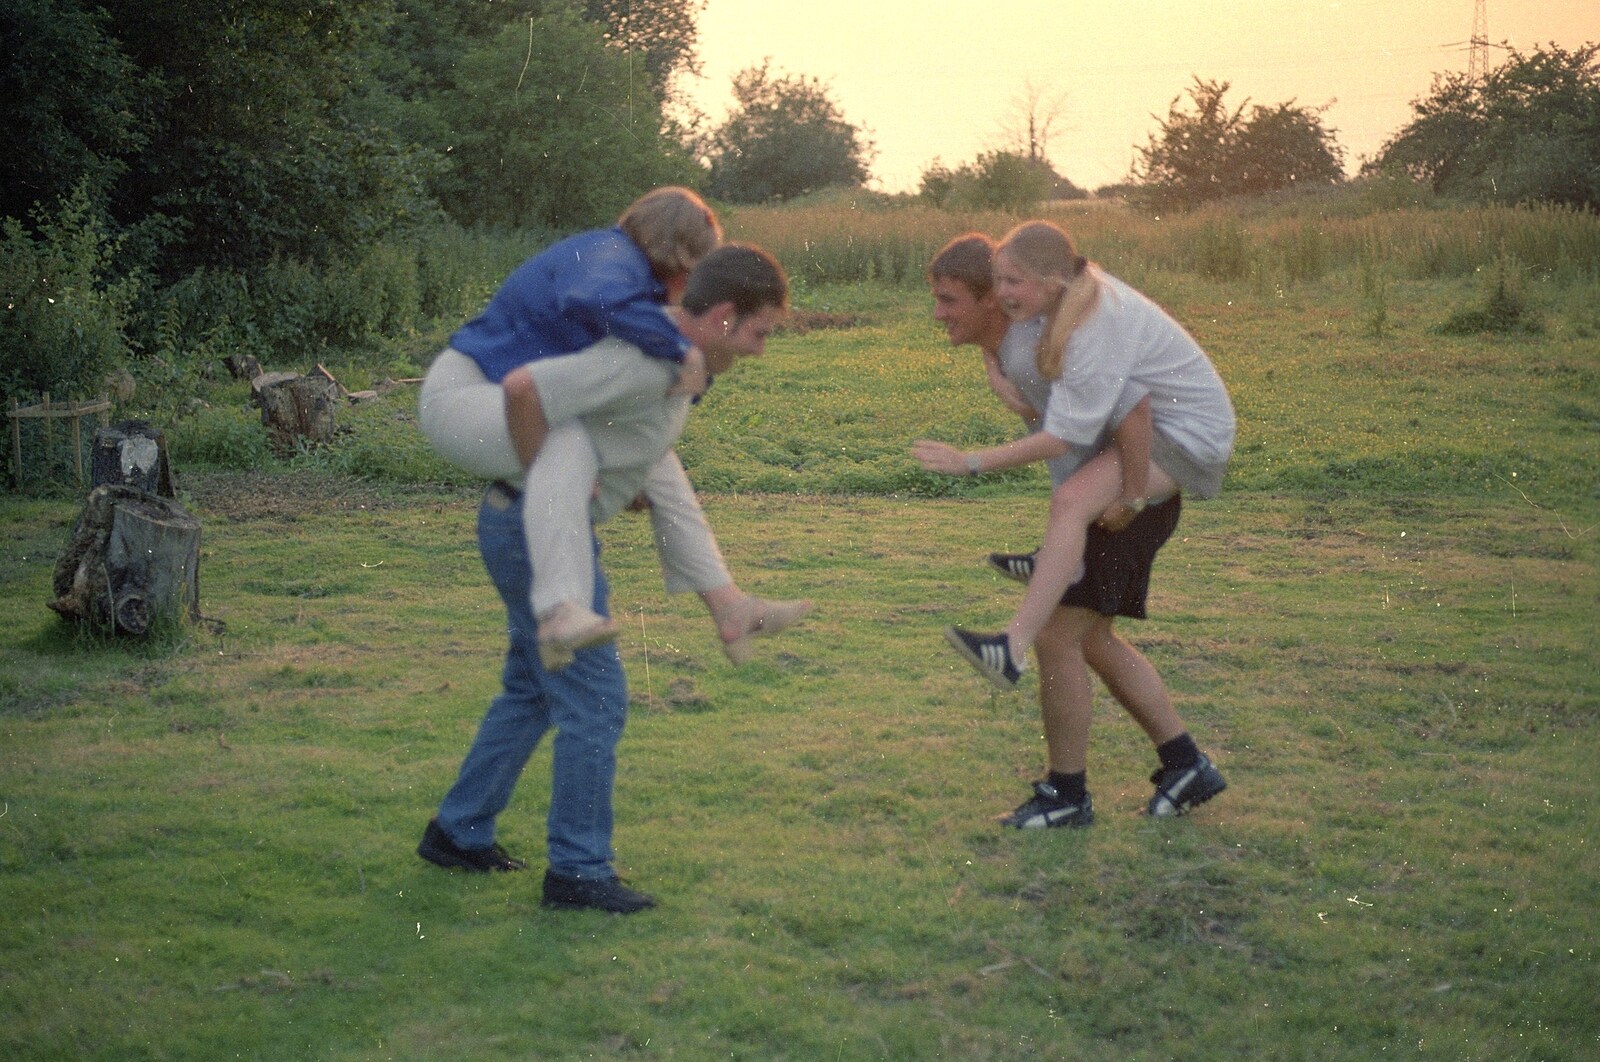 There's some piggy-back action in the garden from DH's Barbeque at The Swan Inn, Brome, Suffolk - July 14th 1996